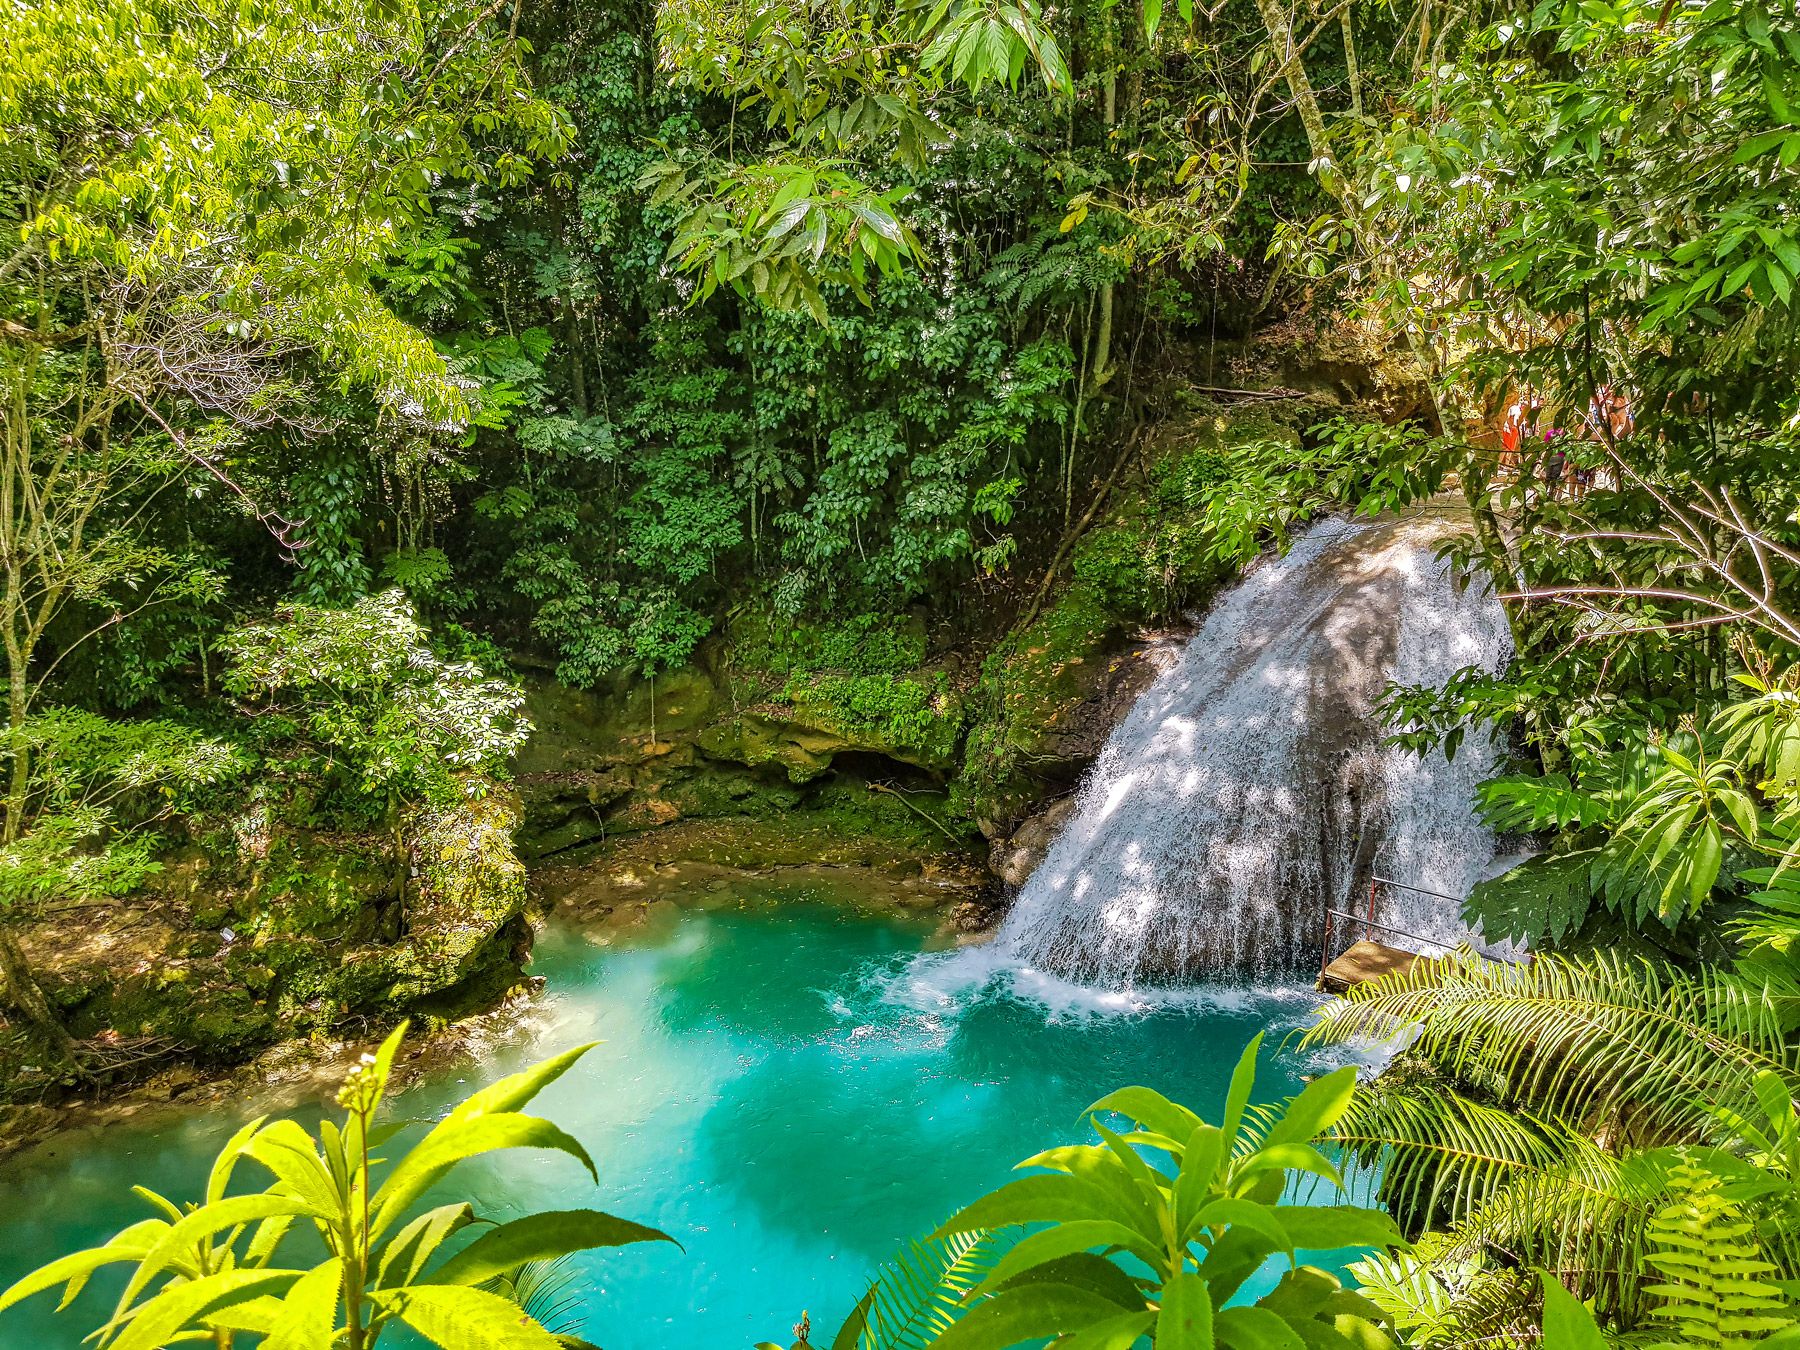 42 Wonderful Things To Do In Jamaica: Top Points of Interest on the Island